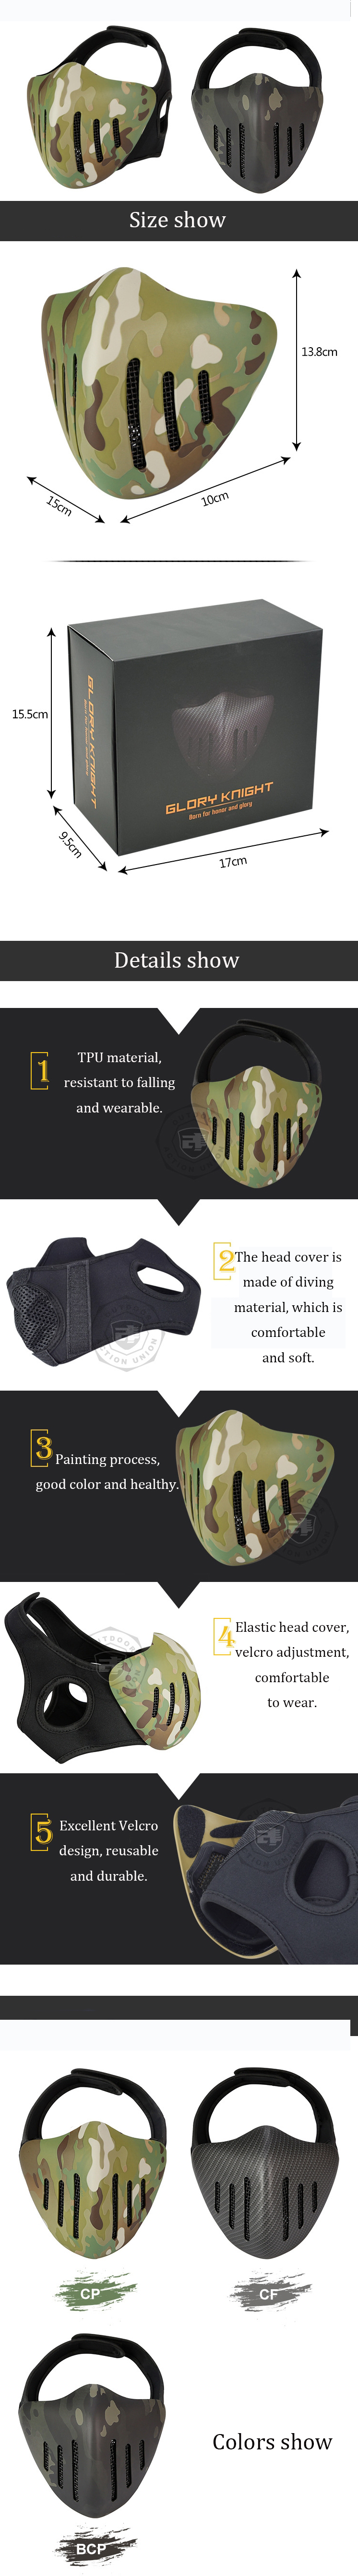 ACTION-UNION-MK036-TPU-Tactical-Mask-Outdoor-Hunting-Cycling-Sports-Masks-With-Head-Cover-Camouflage-1535277-2